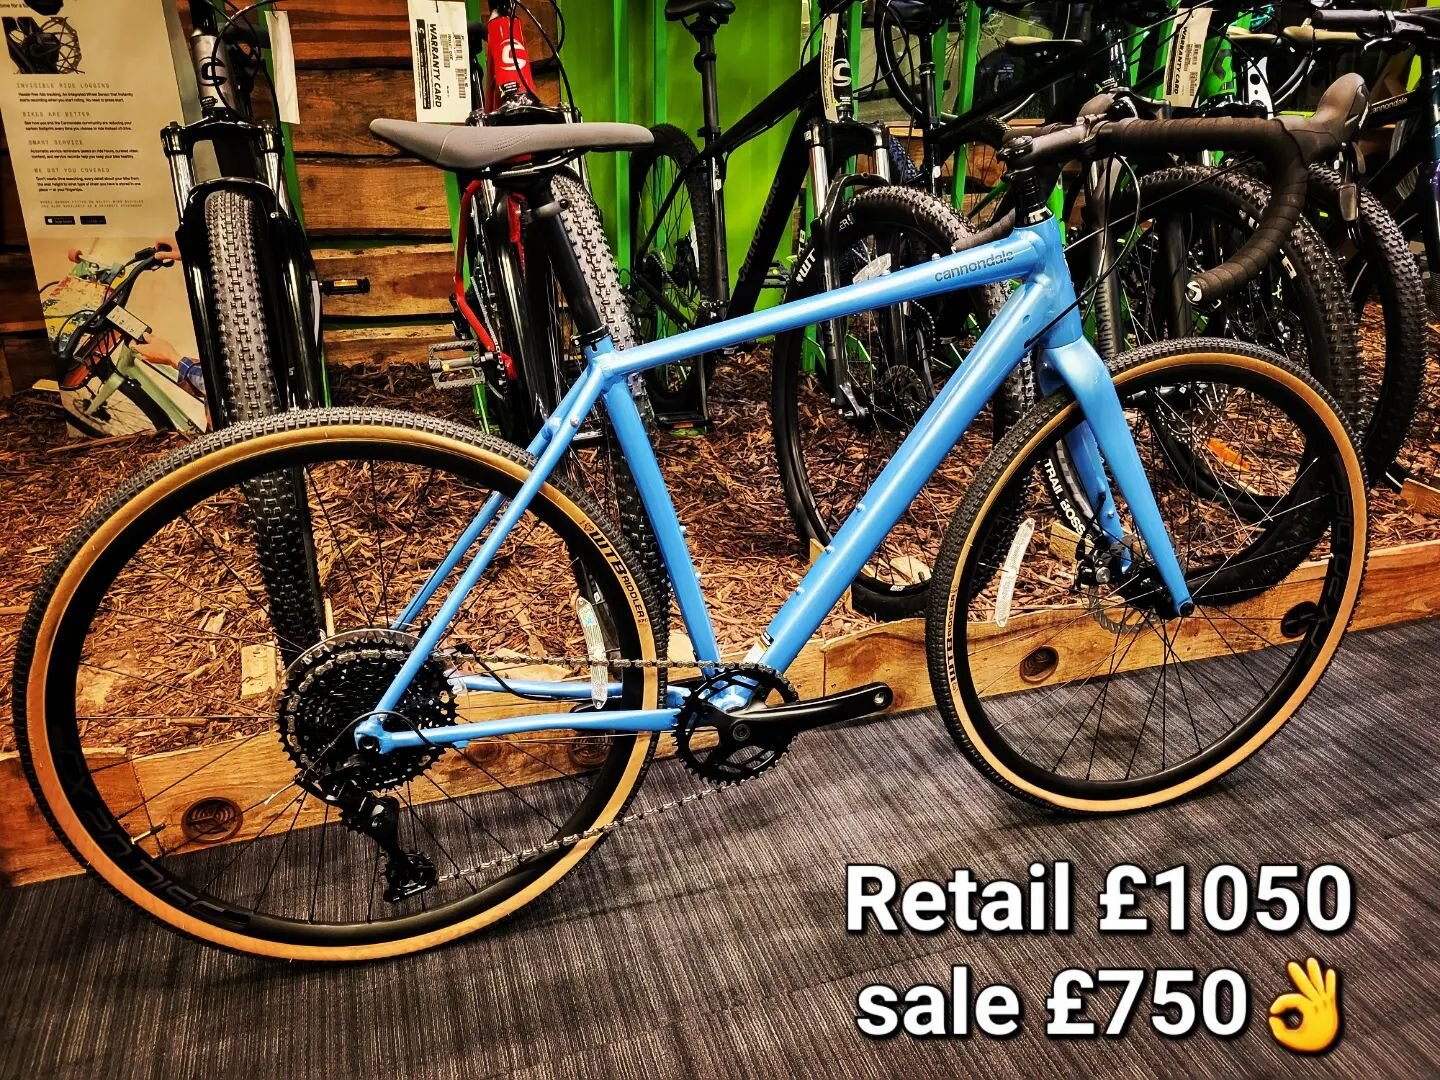 Black Friday Sale is Tomorrow 
Loads of bargains on most things 👍
A few Bike to show but  lot's more in store 👍
Help me pay my electricity Bill 
#localbikeshop #glossophighstreet #peakdistrictbikeshop #blackfriday #blackfridaysale #grababargain #bu